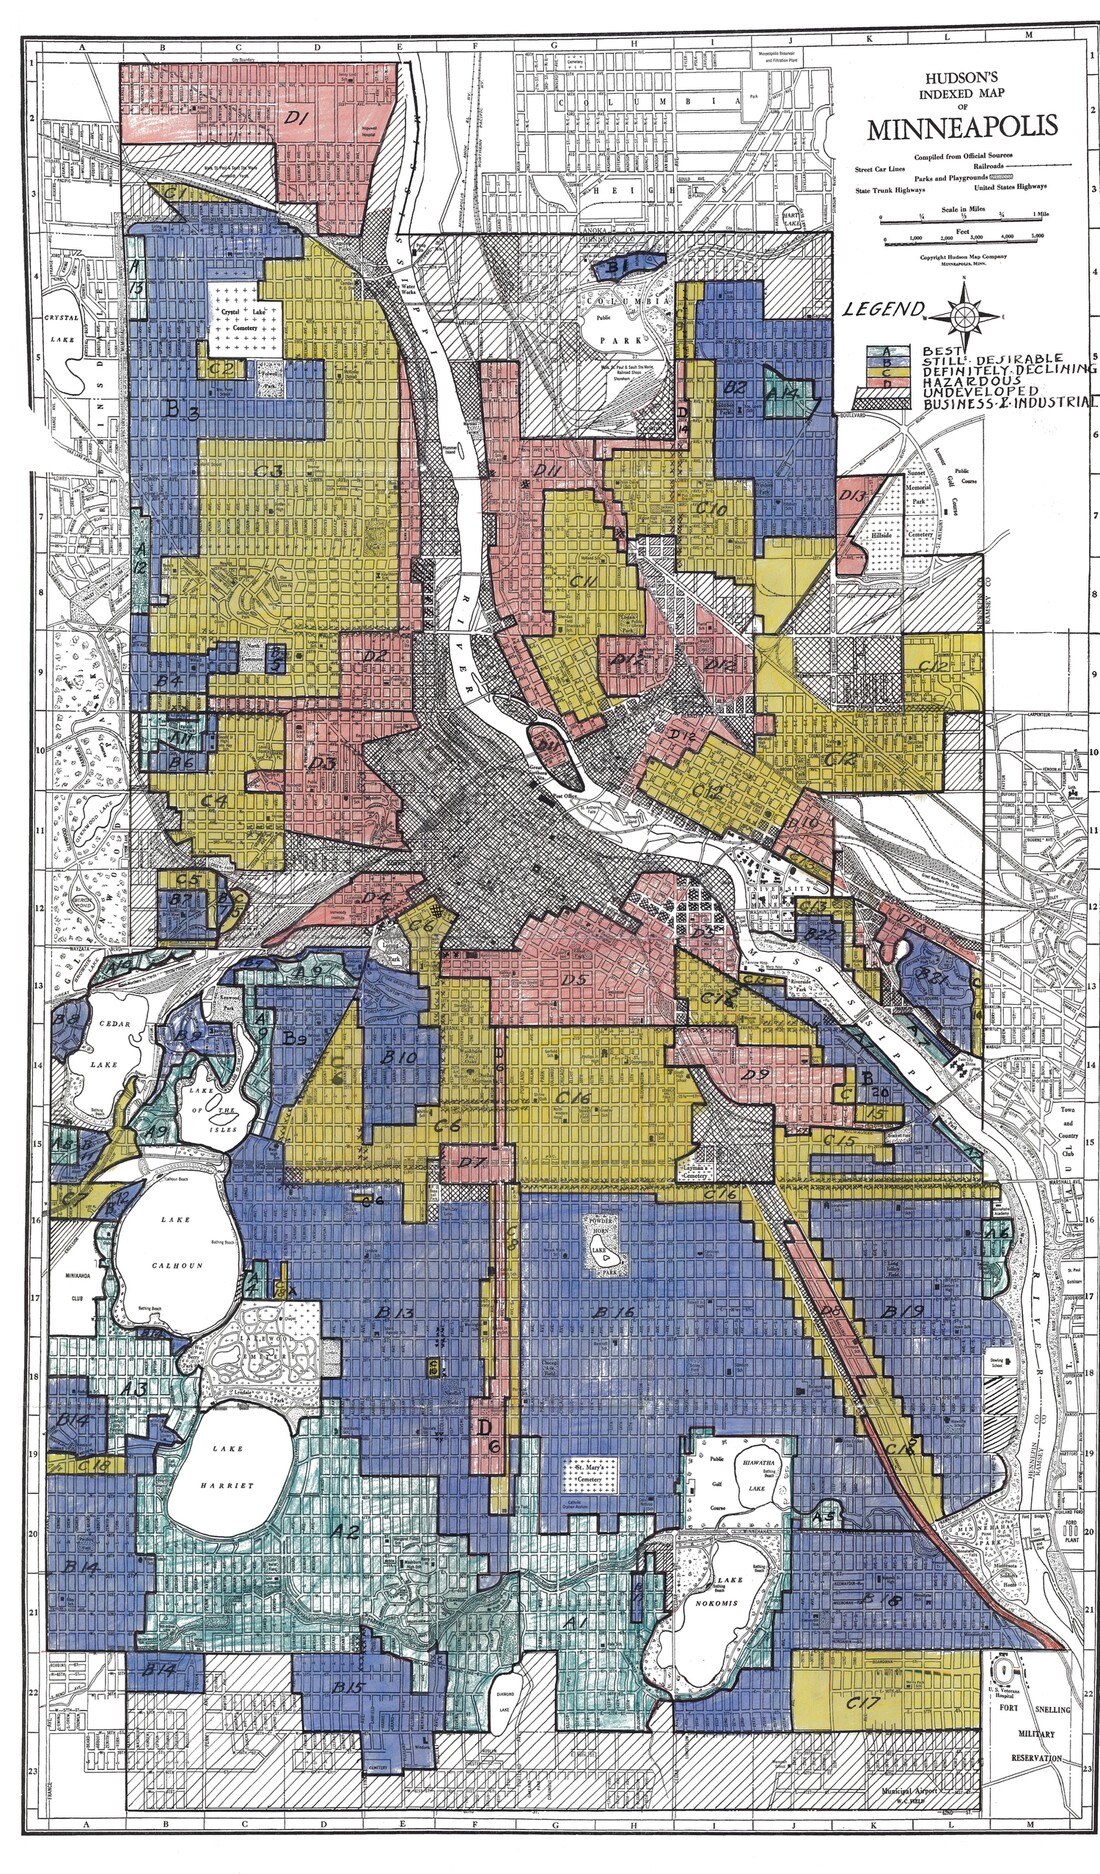 HOLC-map-of-redlining-in-Minneapolis-19xxx-from-mapping-inequality-project.jpg